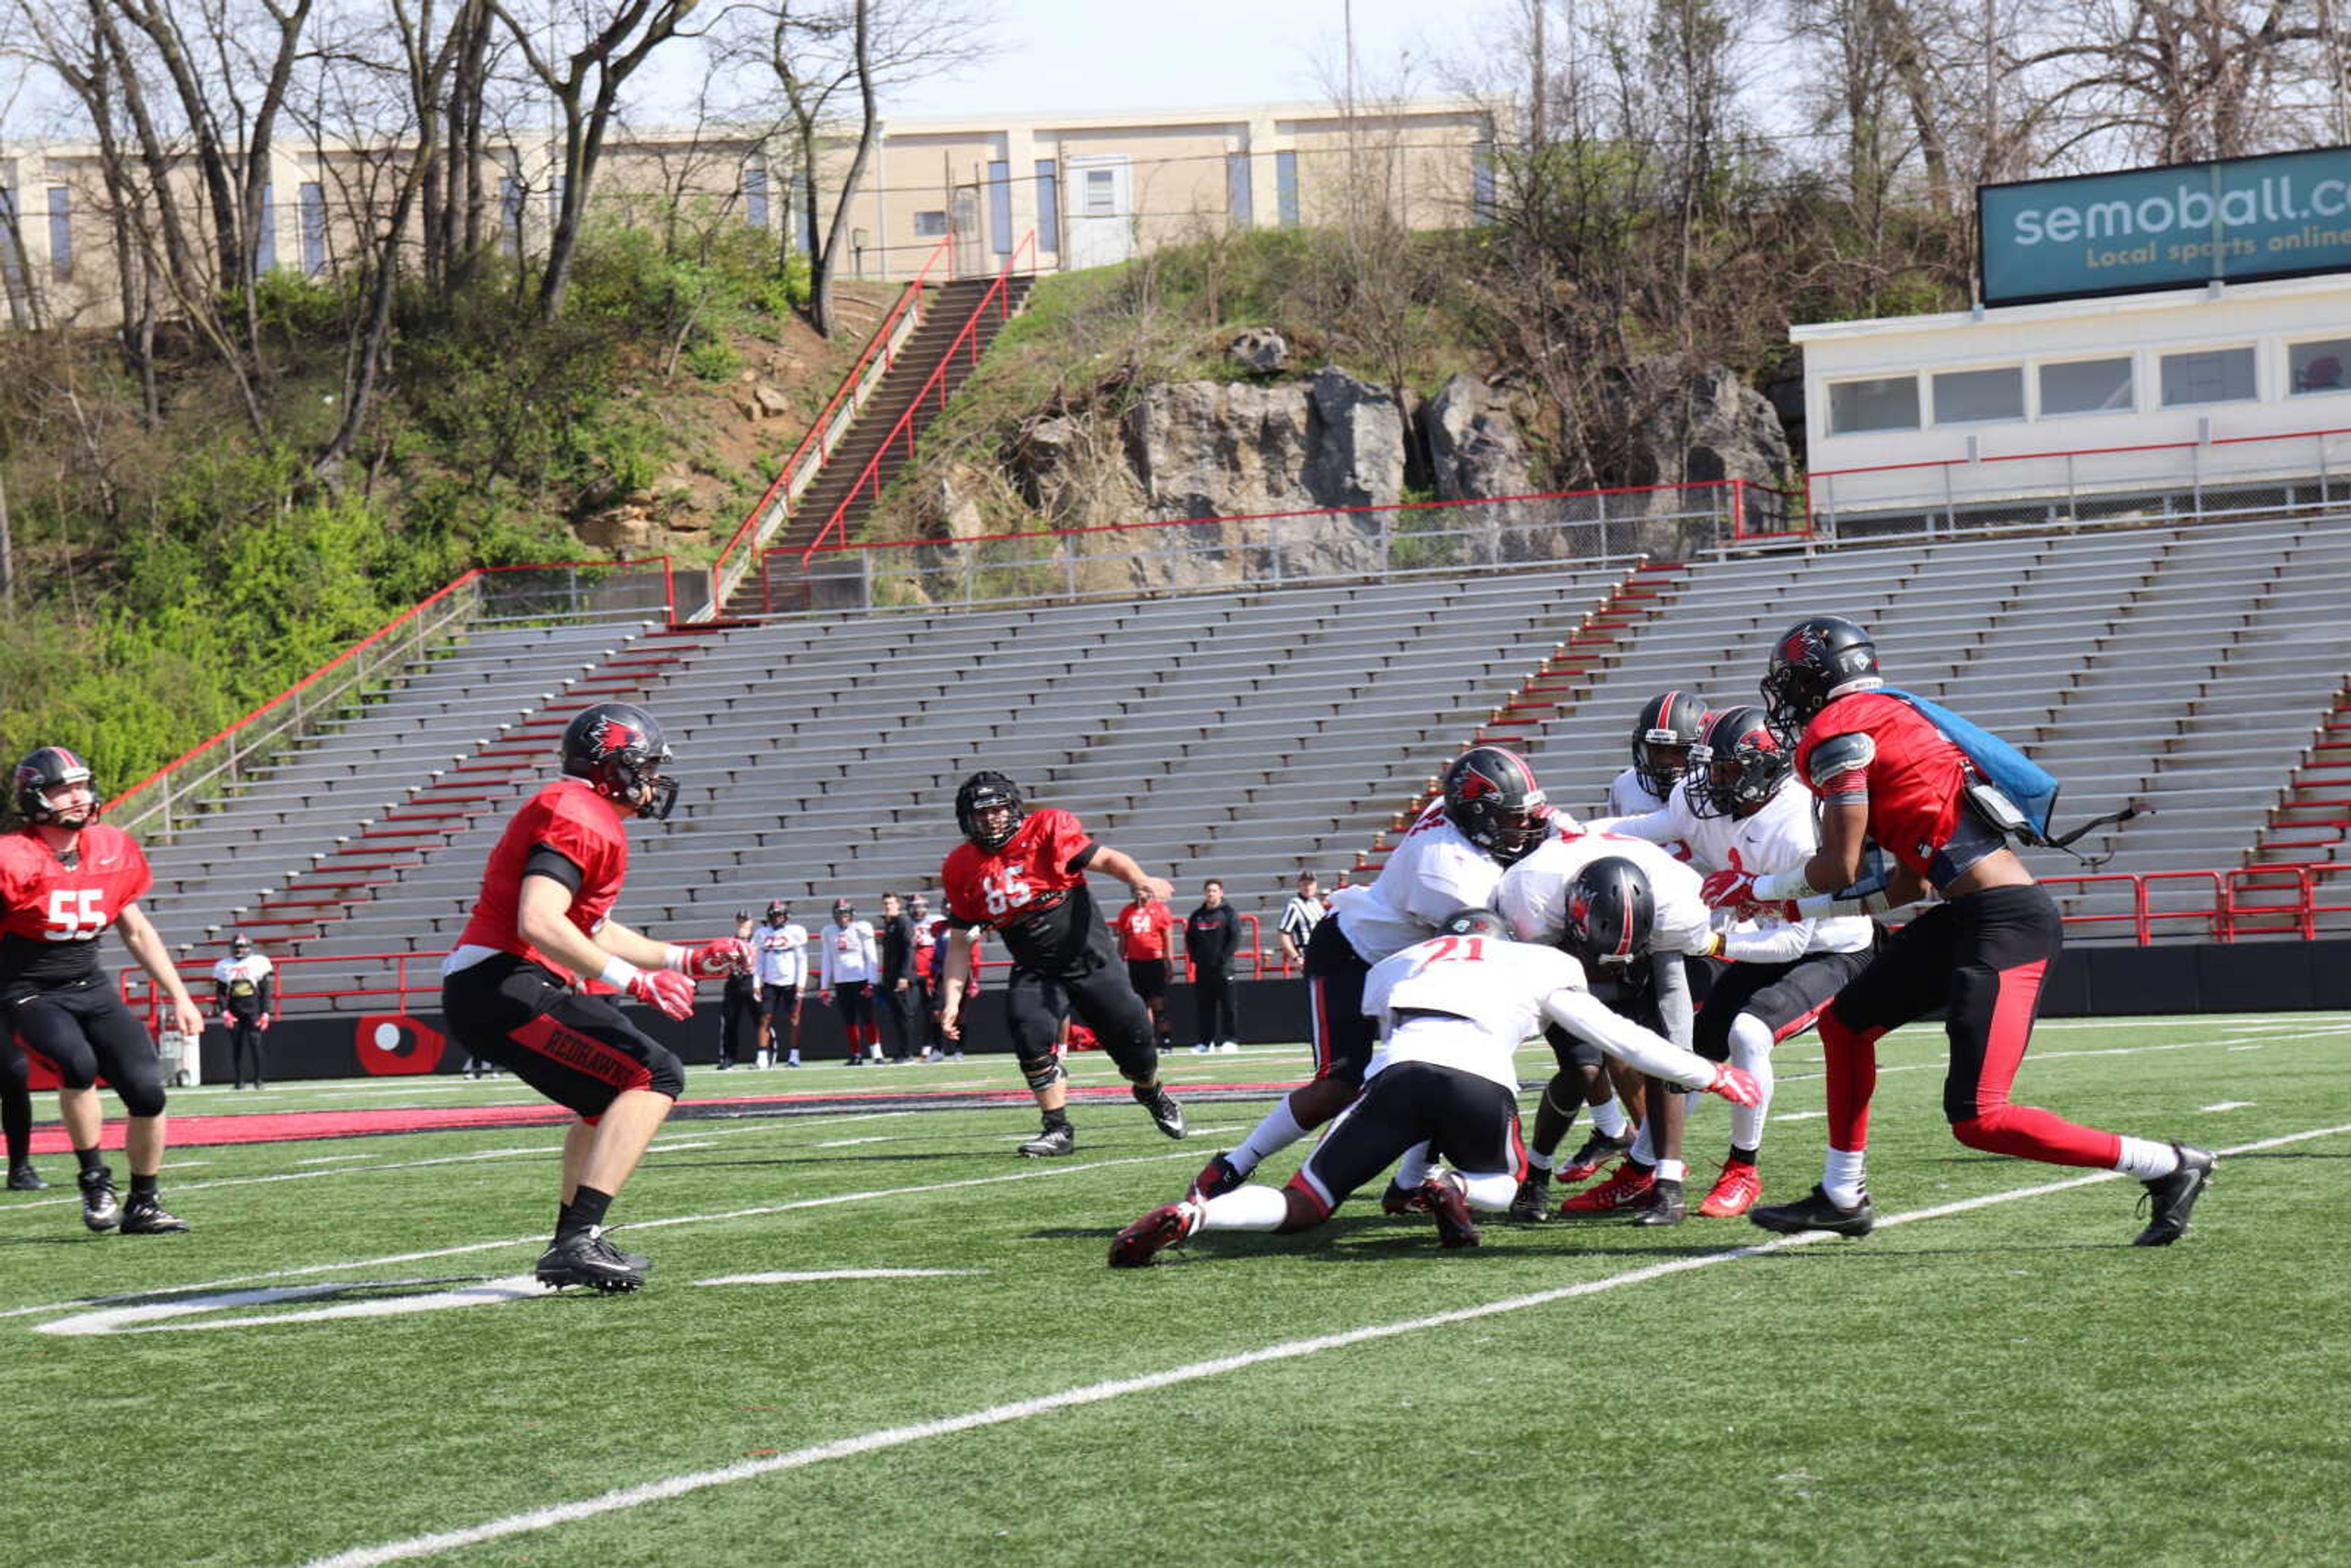 The Southeast team football scrimmaged during spring practices at Houck Stadium.